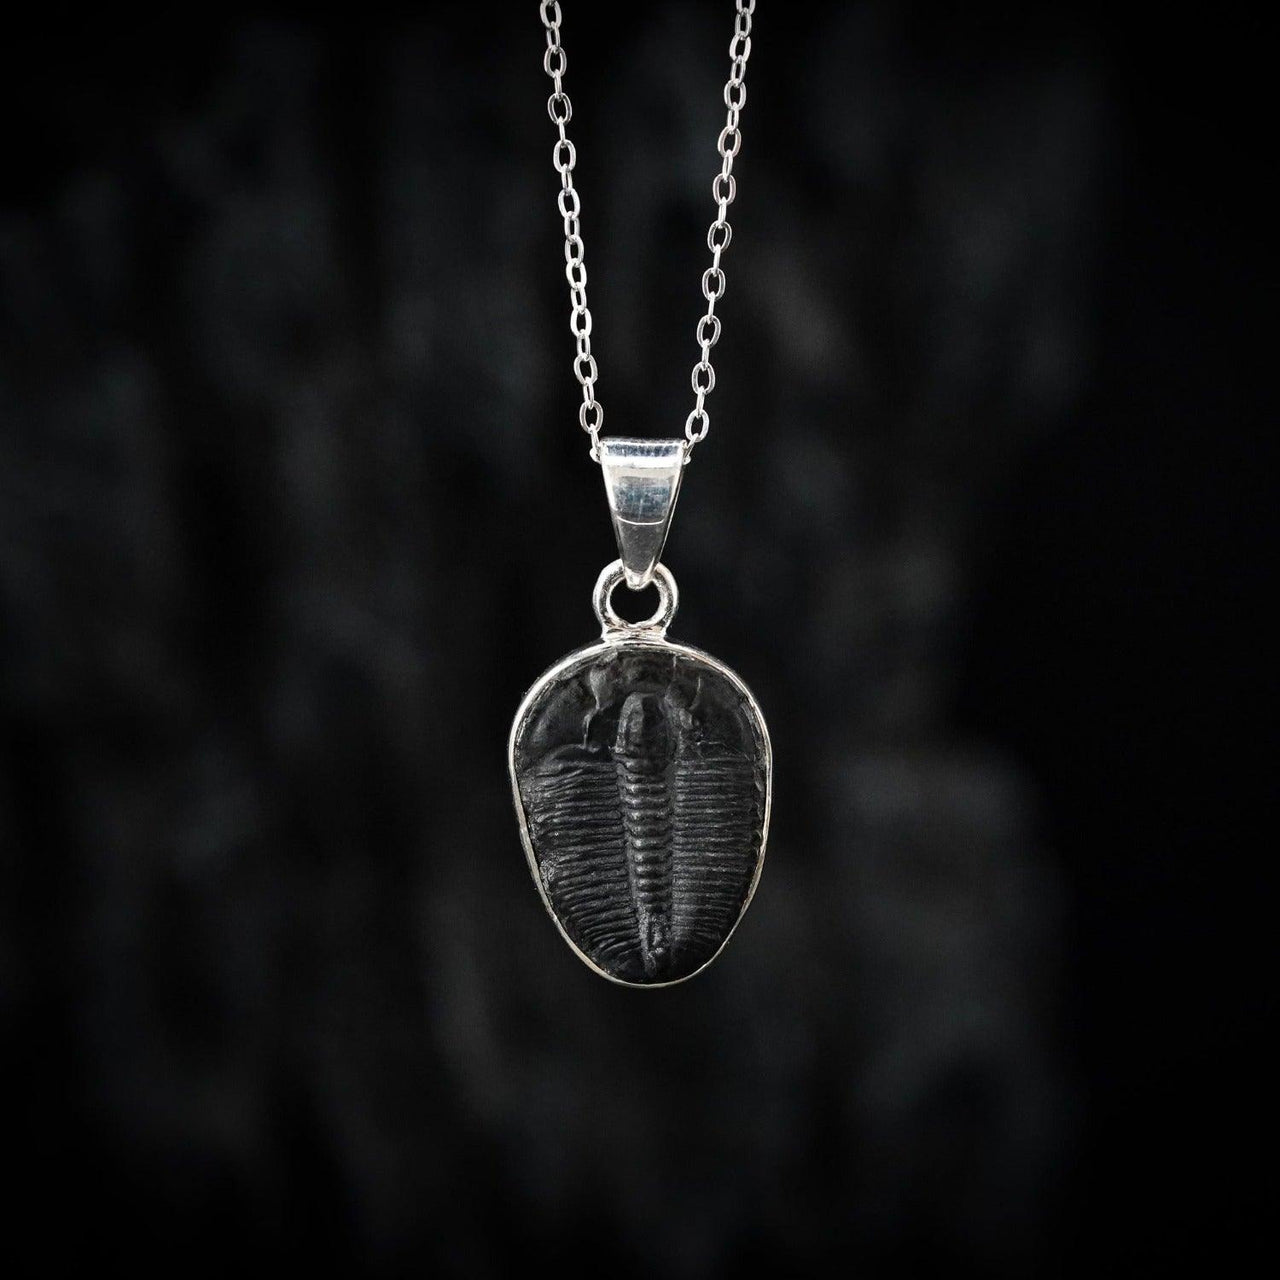 Small Genuine Trilobite as a pendant by Black Feather Design